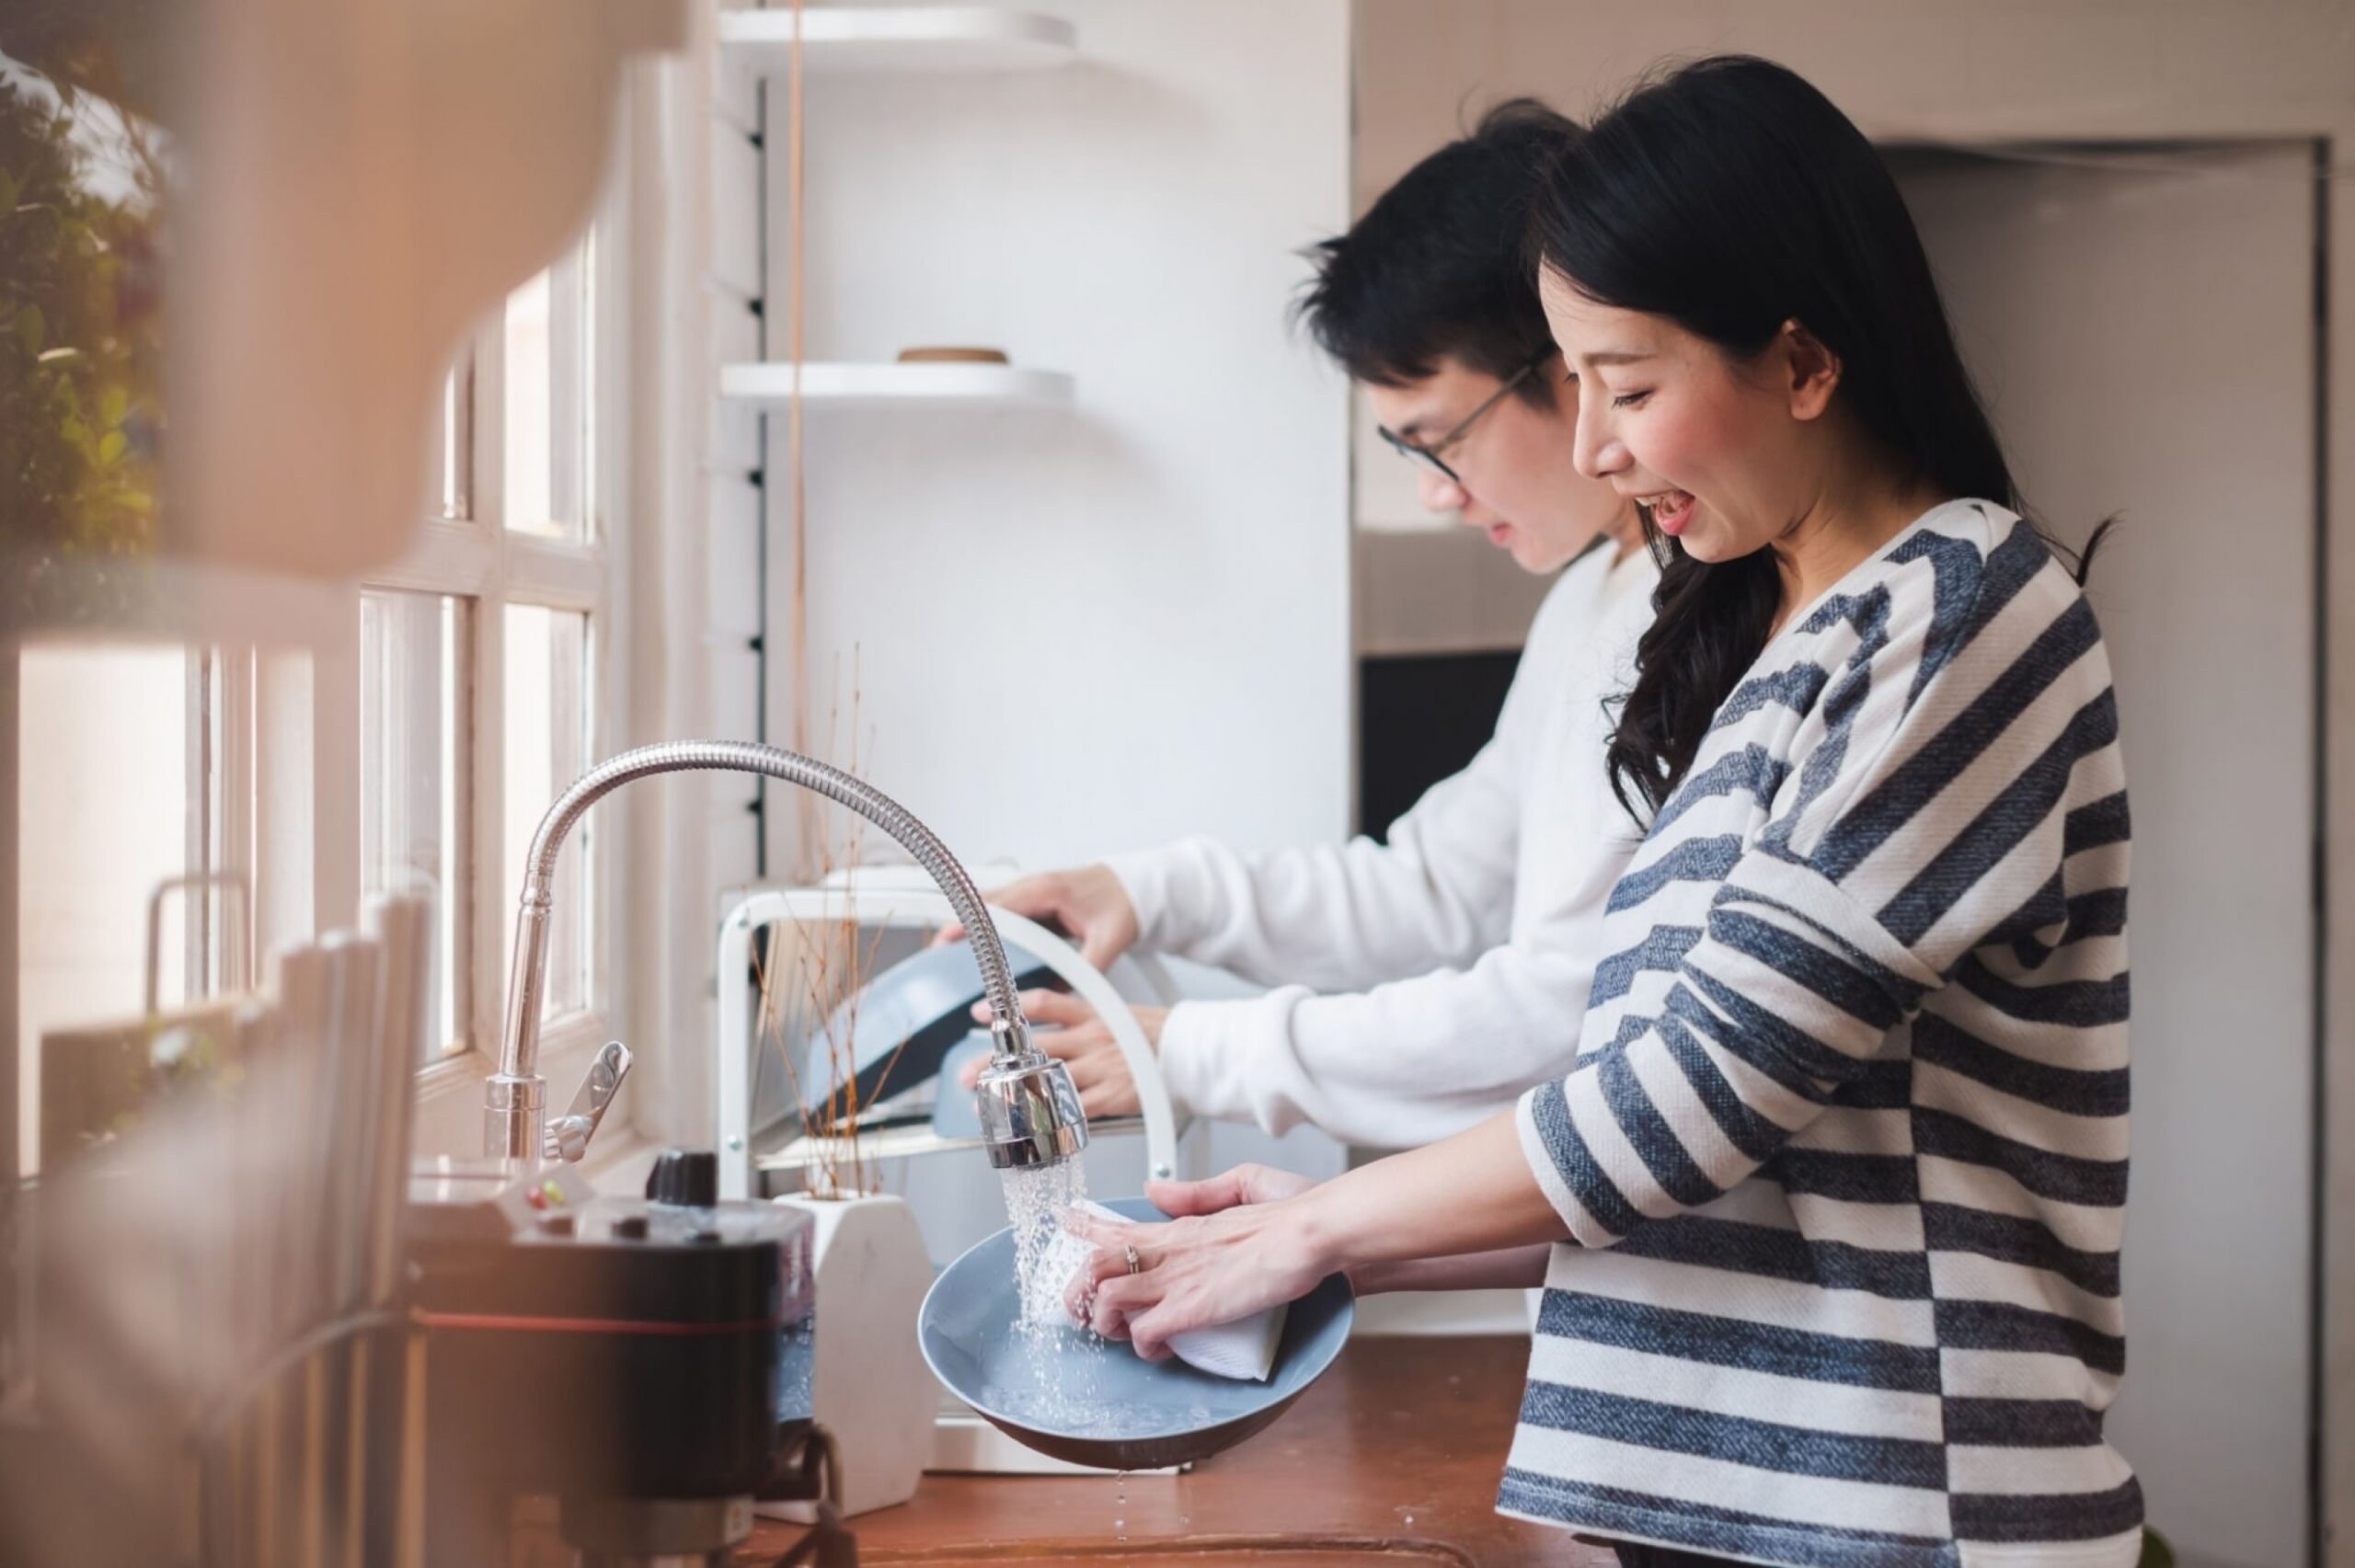 Asian couple family washing dishes together at kitchen